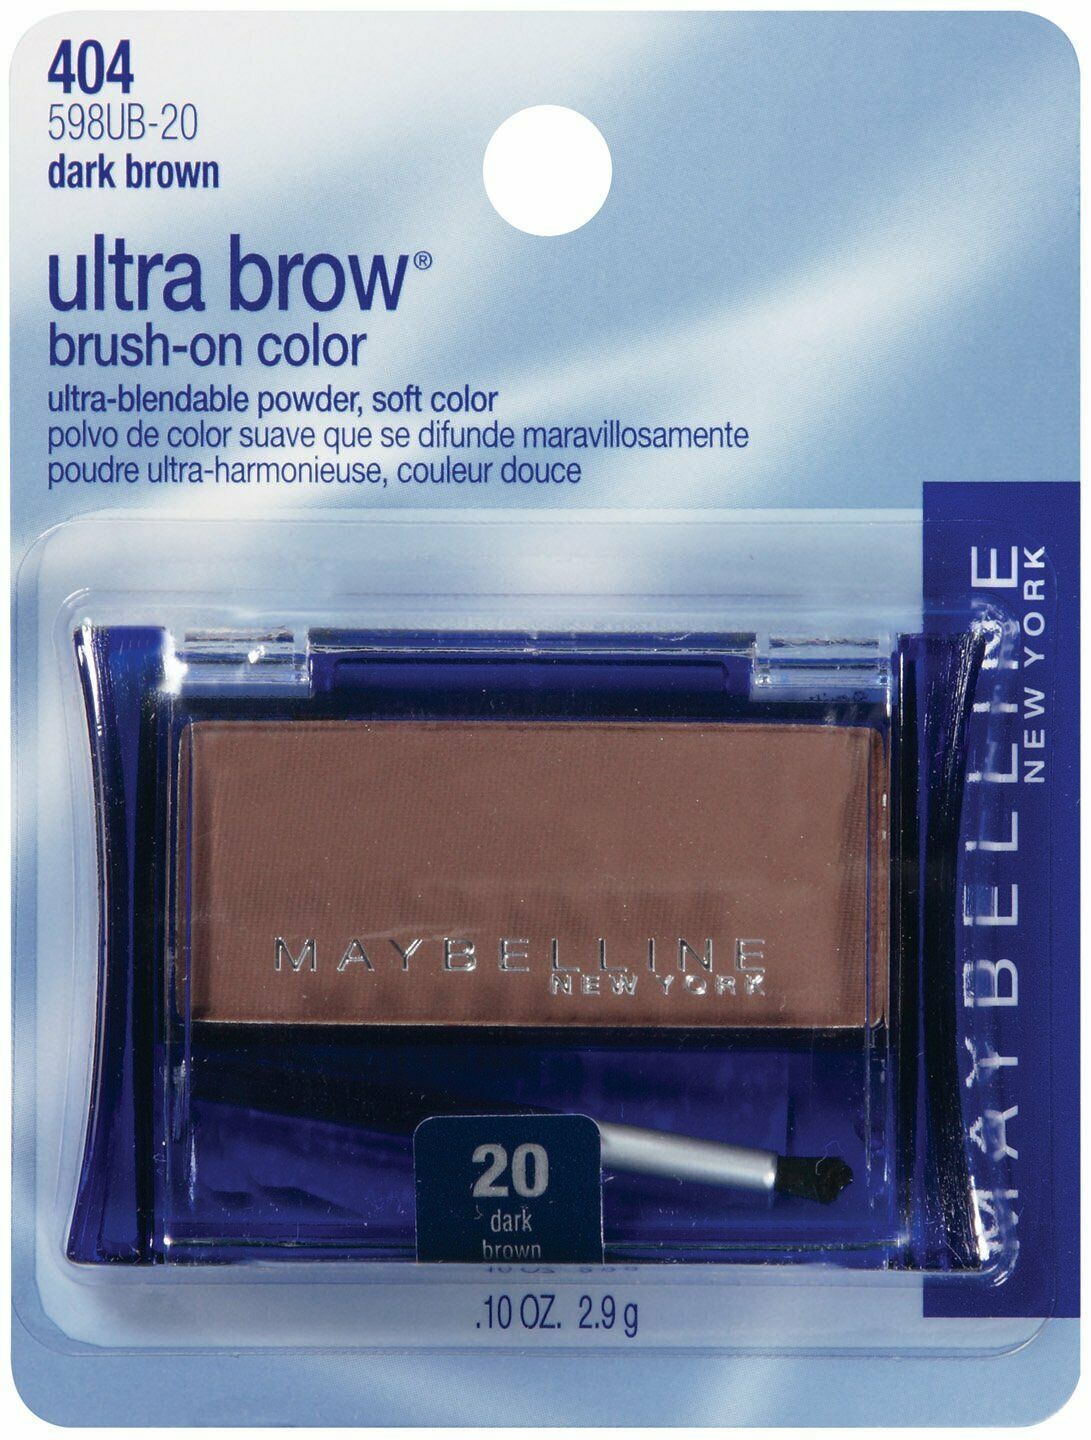 BUY1 GET1 AT 20% OFF Maybelline Ultra Brow Brush-On-Color Powder #20 Dark Brown